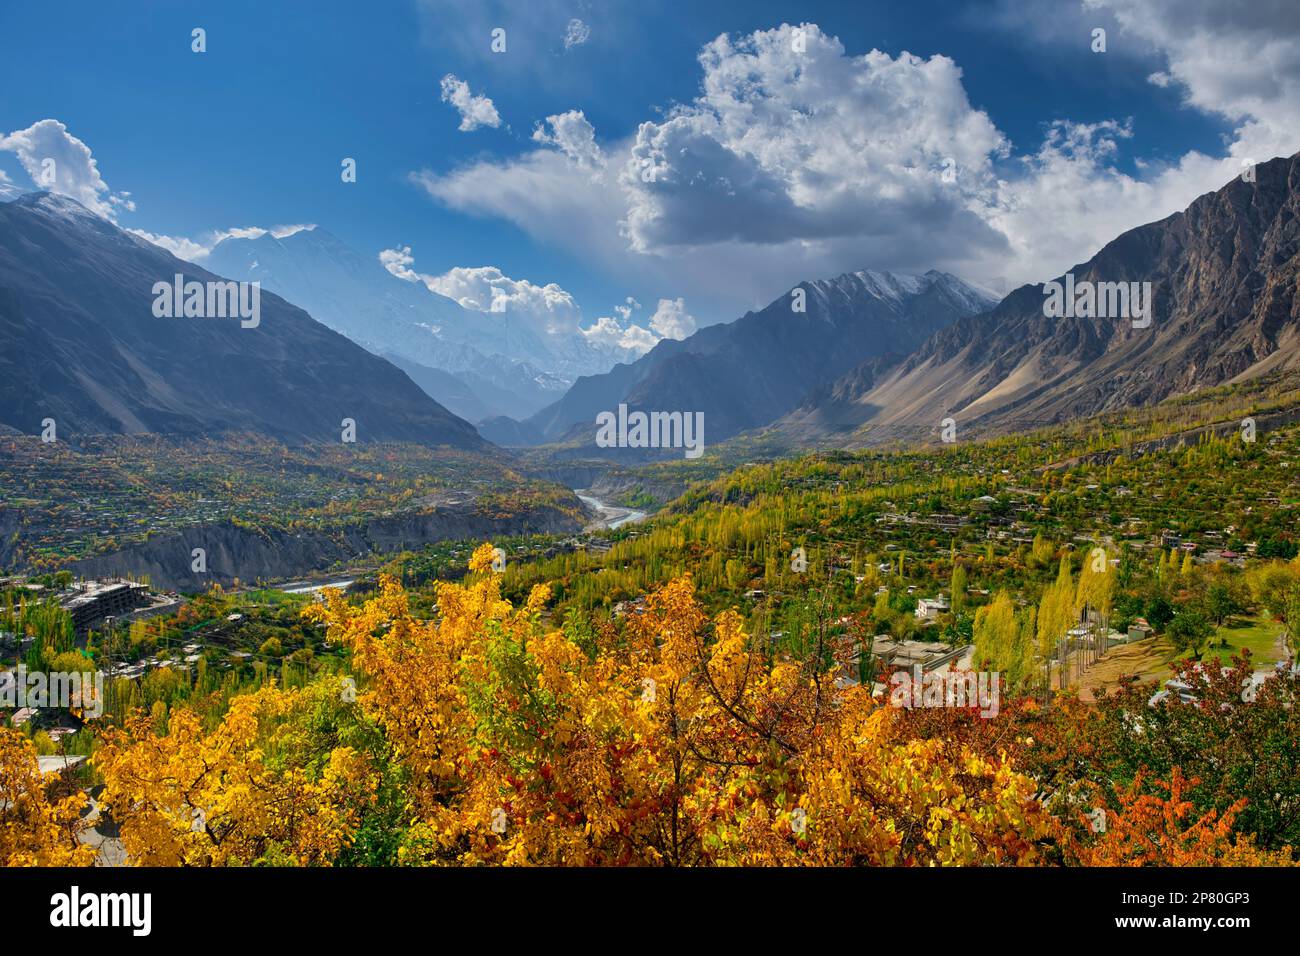 The Fort is set amidst the Hunza and Nager Valleys, which are on either side of River Hunza, running from east to west. The the area is surrounded by Stock Photo